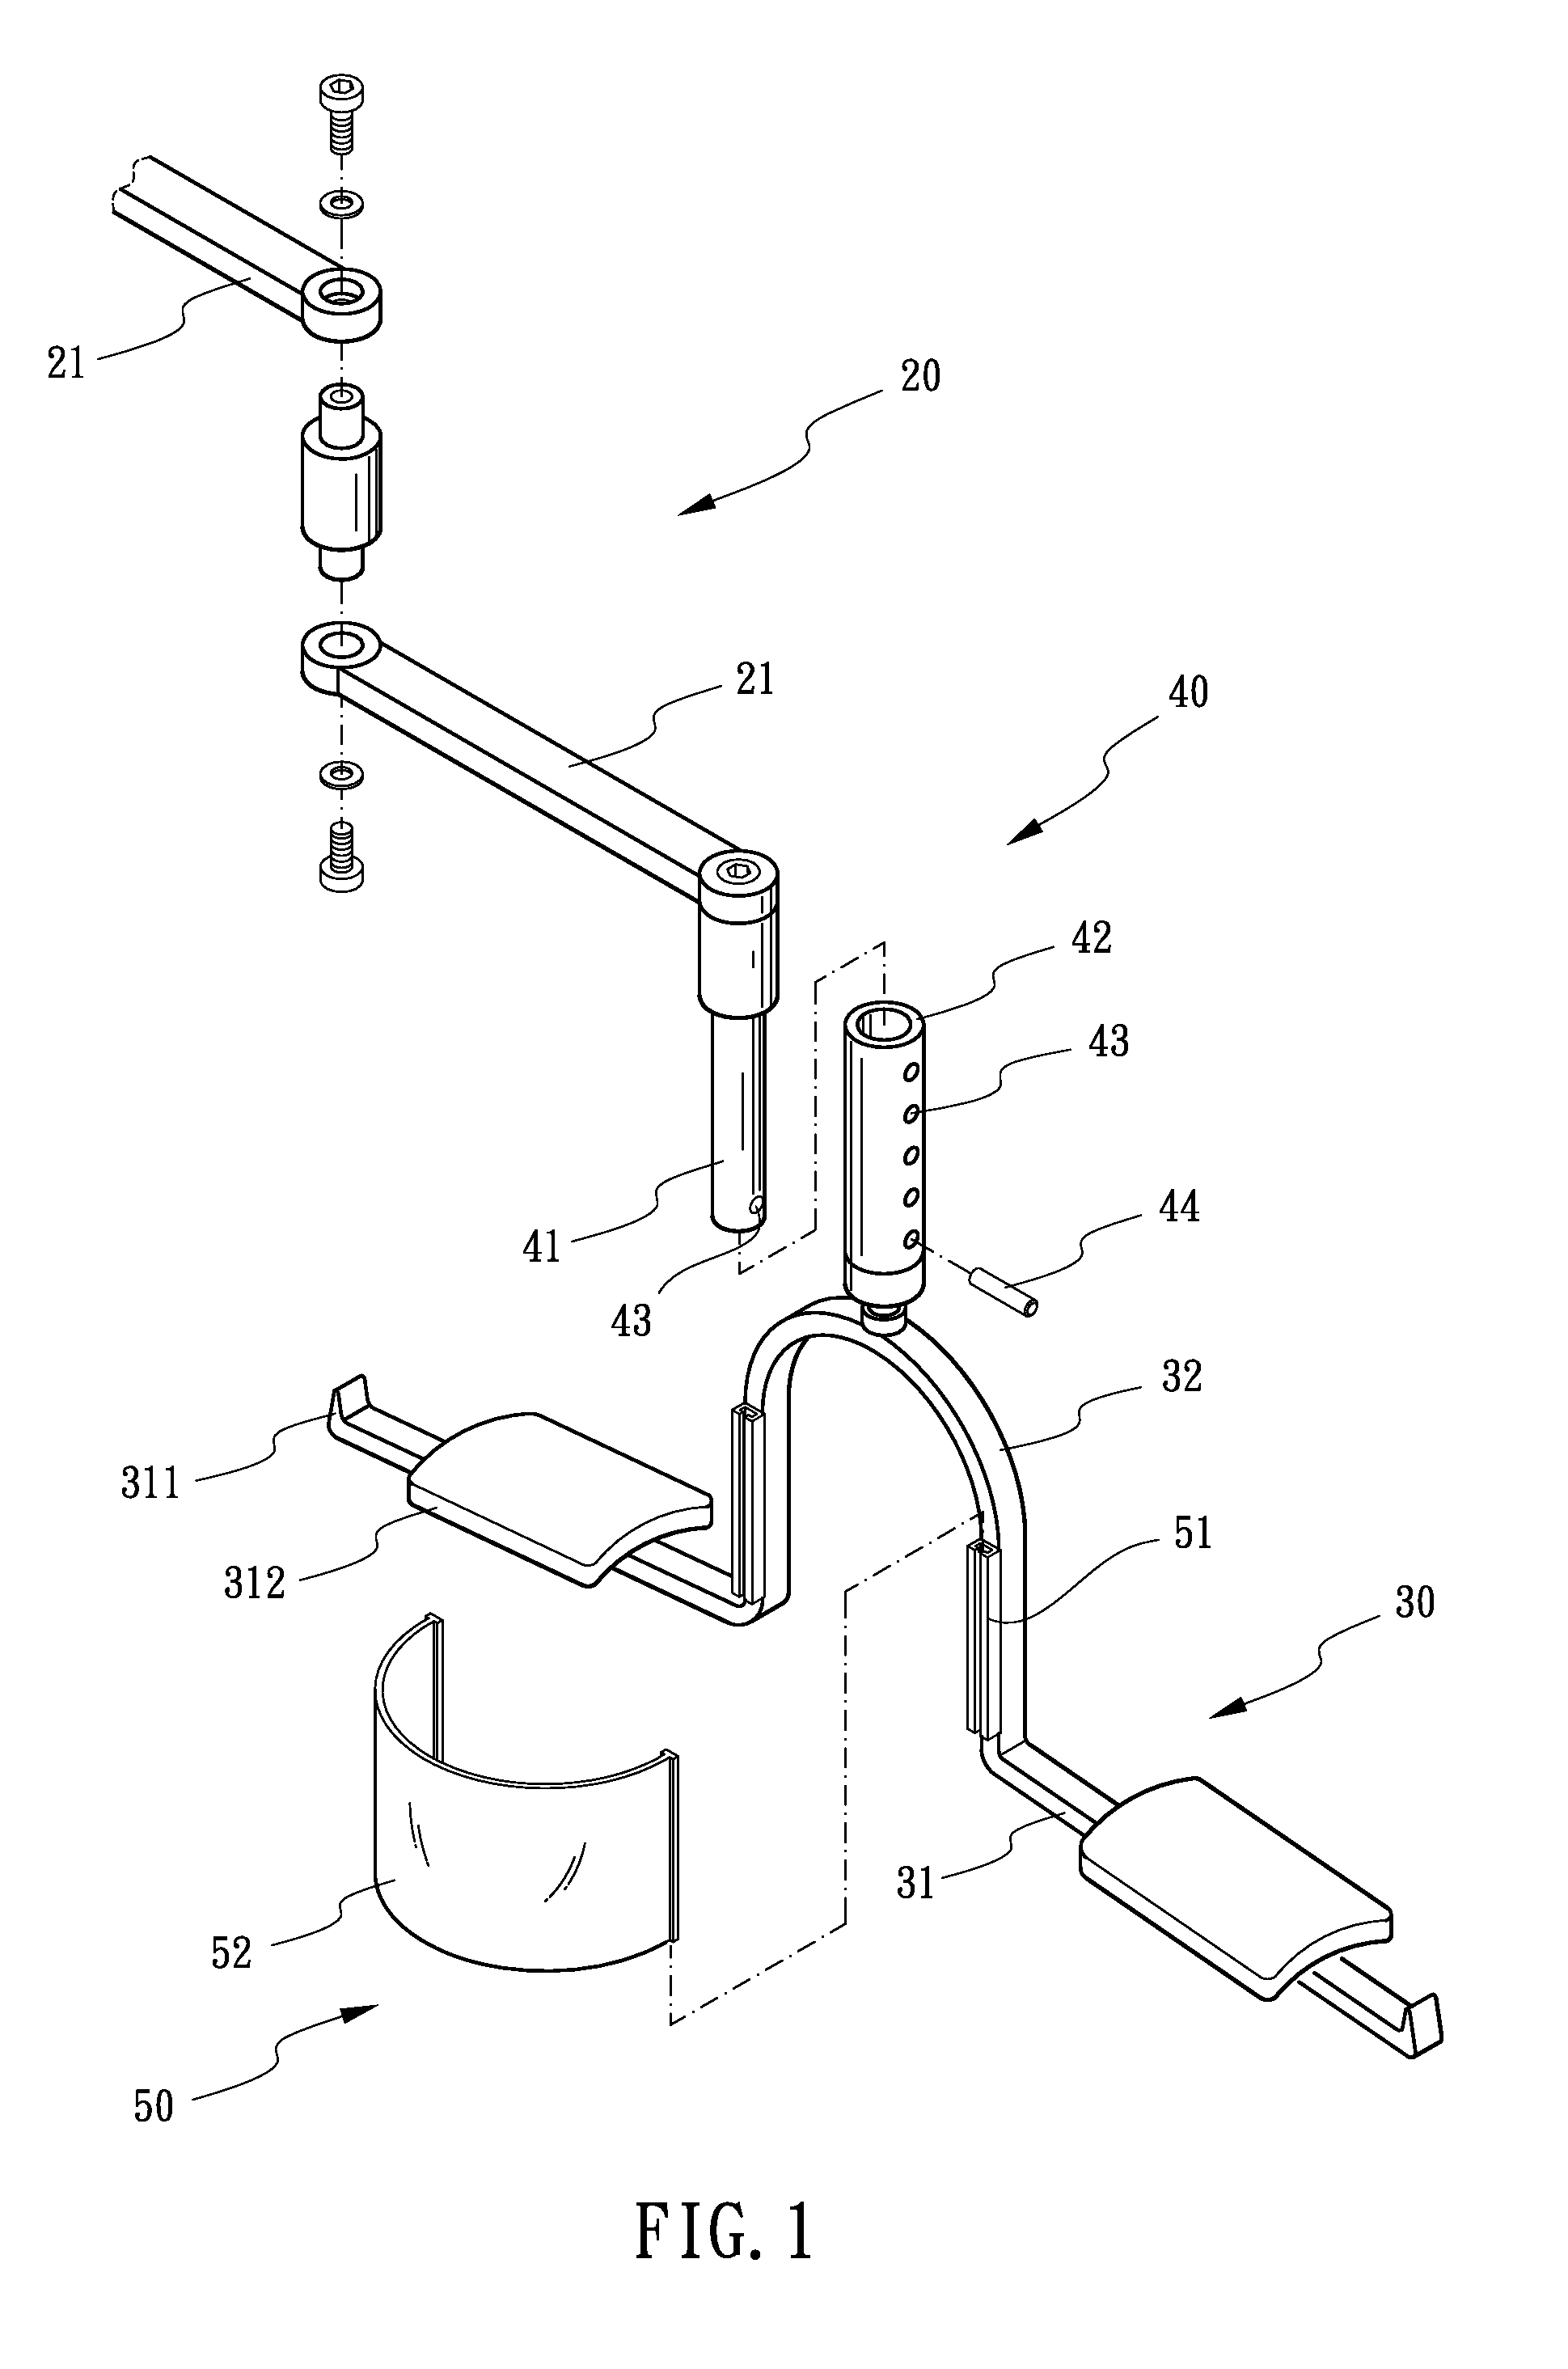 Suspensory lifting load apparatus for lead suits in radiation therapy